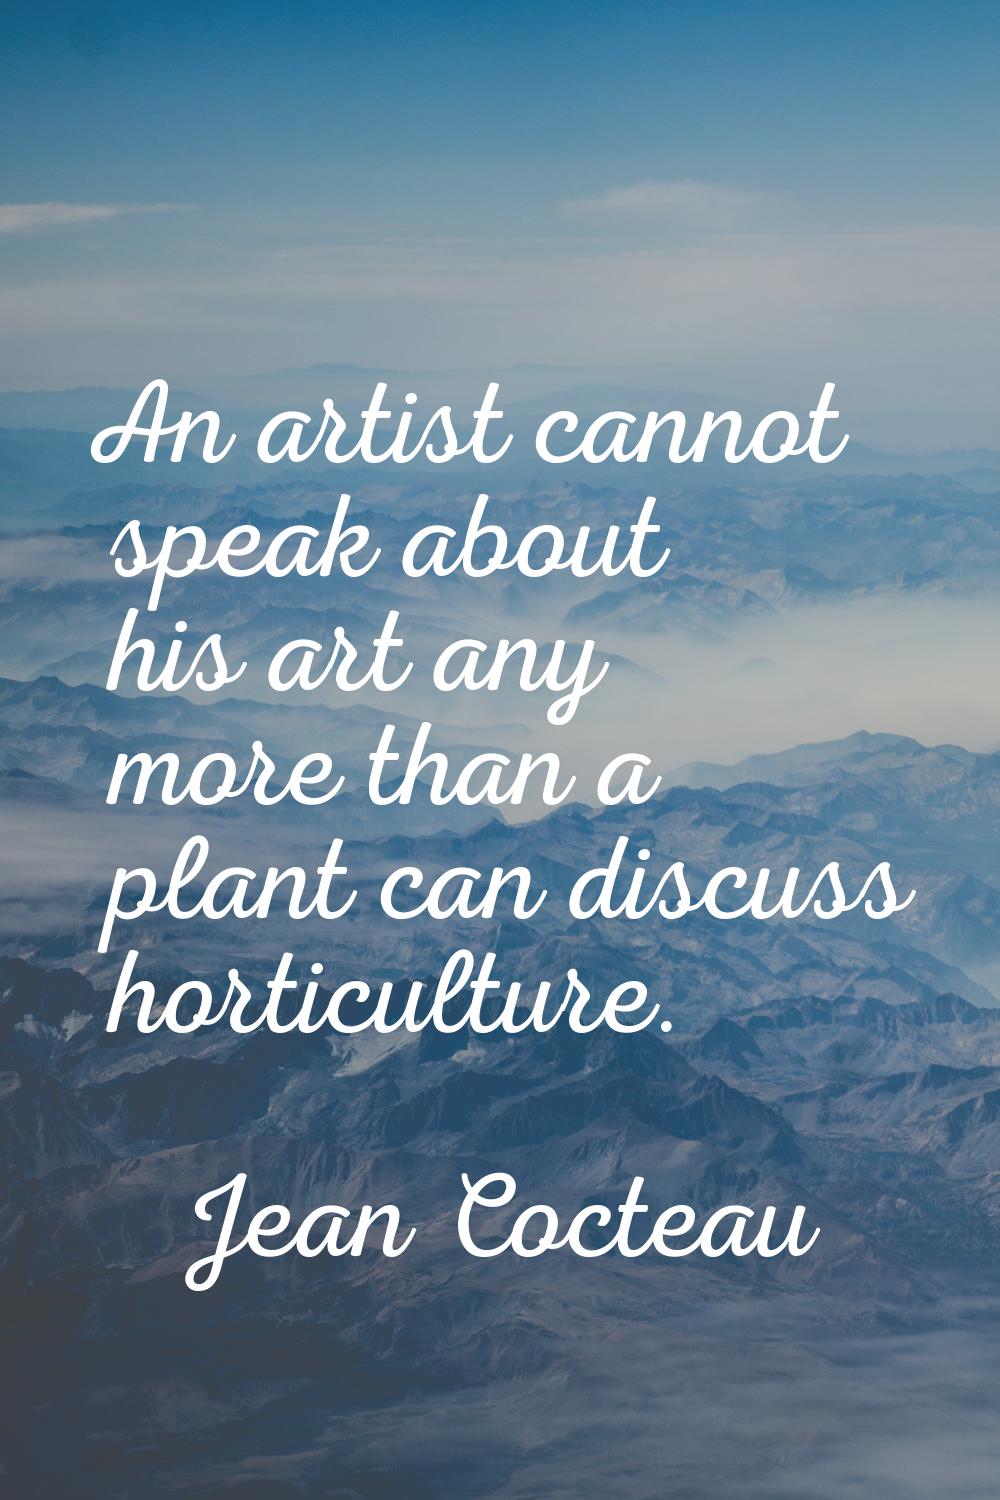 An artist cannot speak about his art any more than a plant can discuss horticulture.